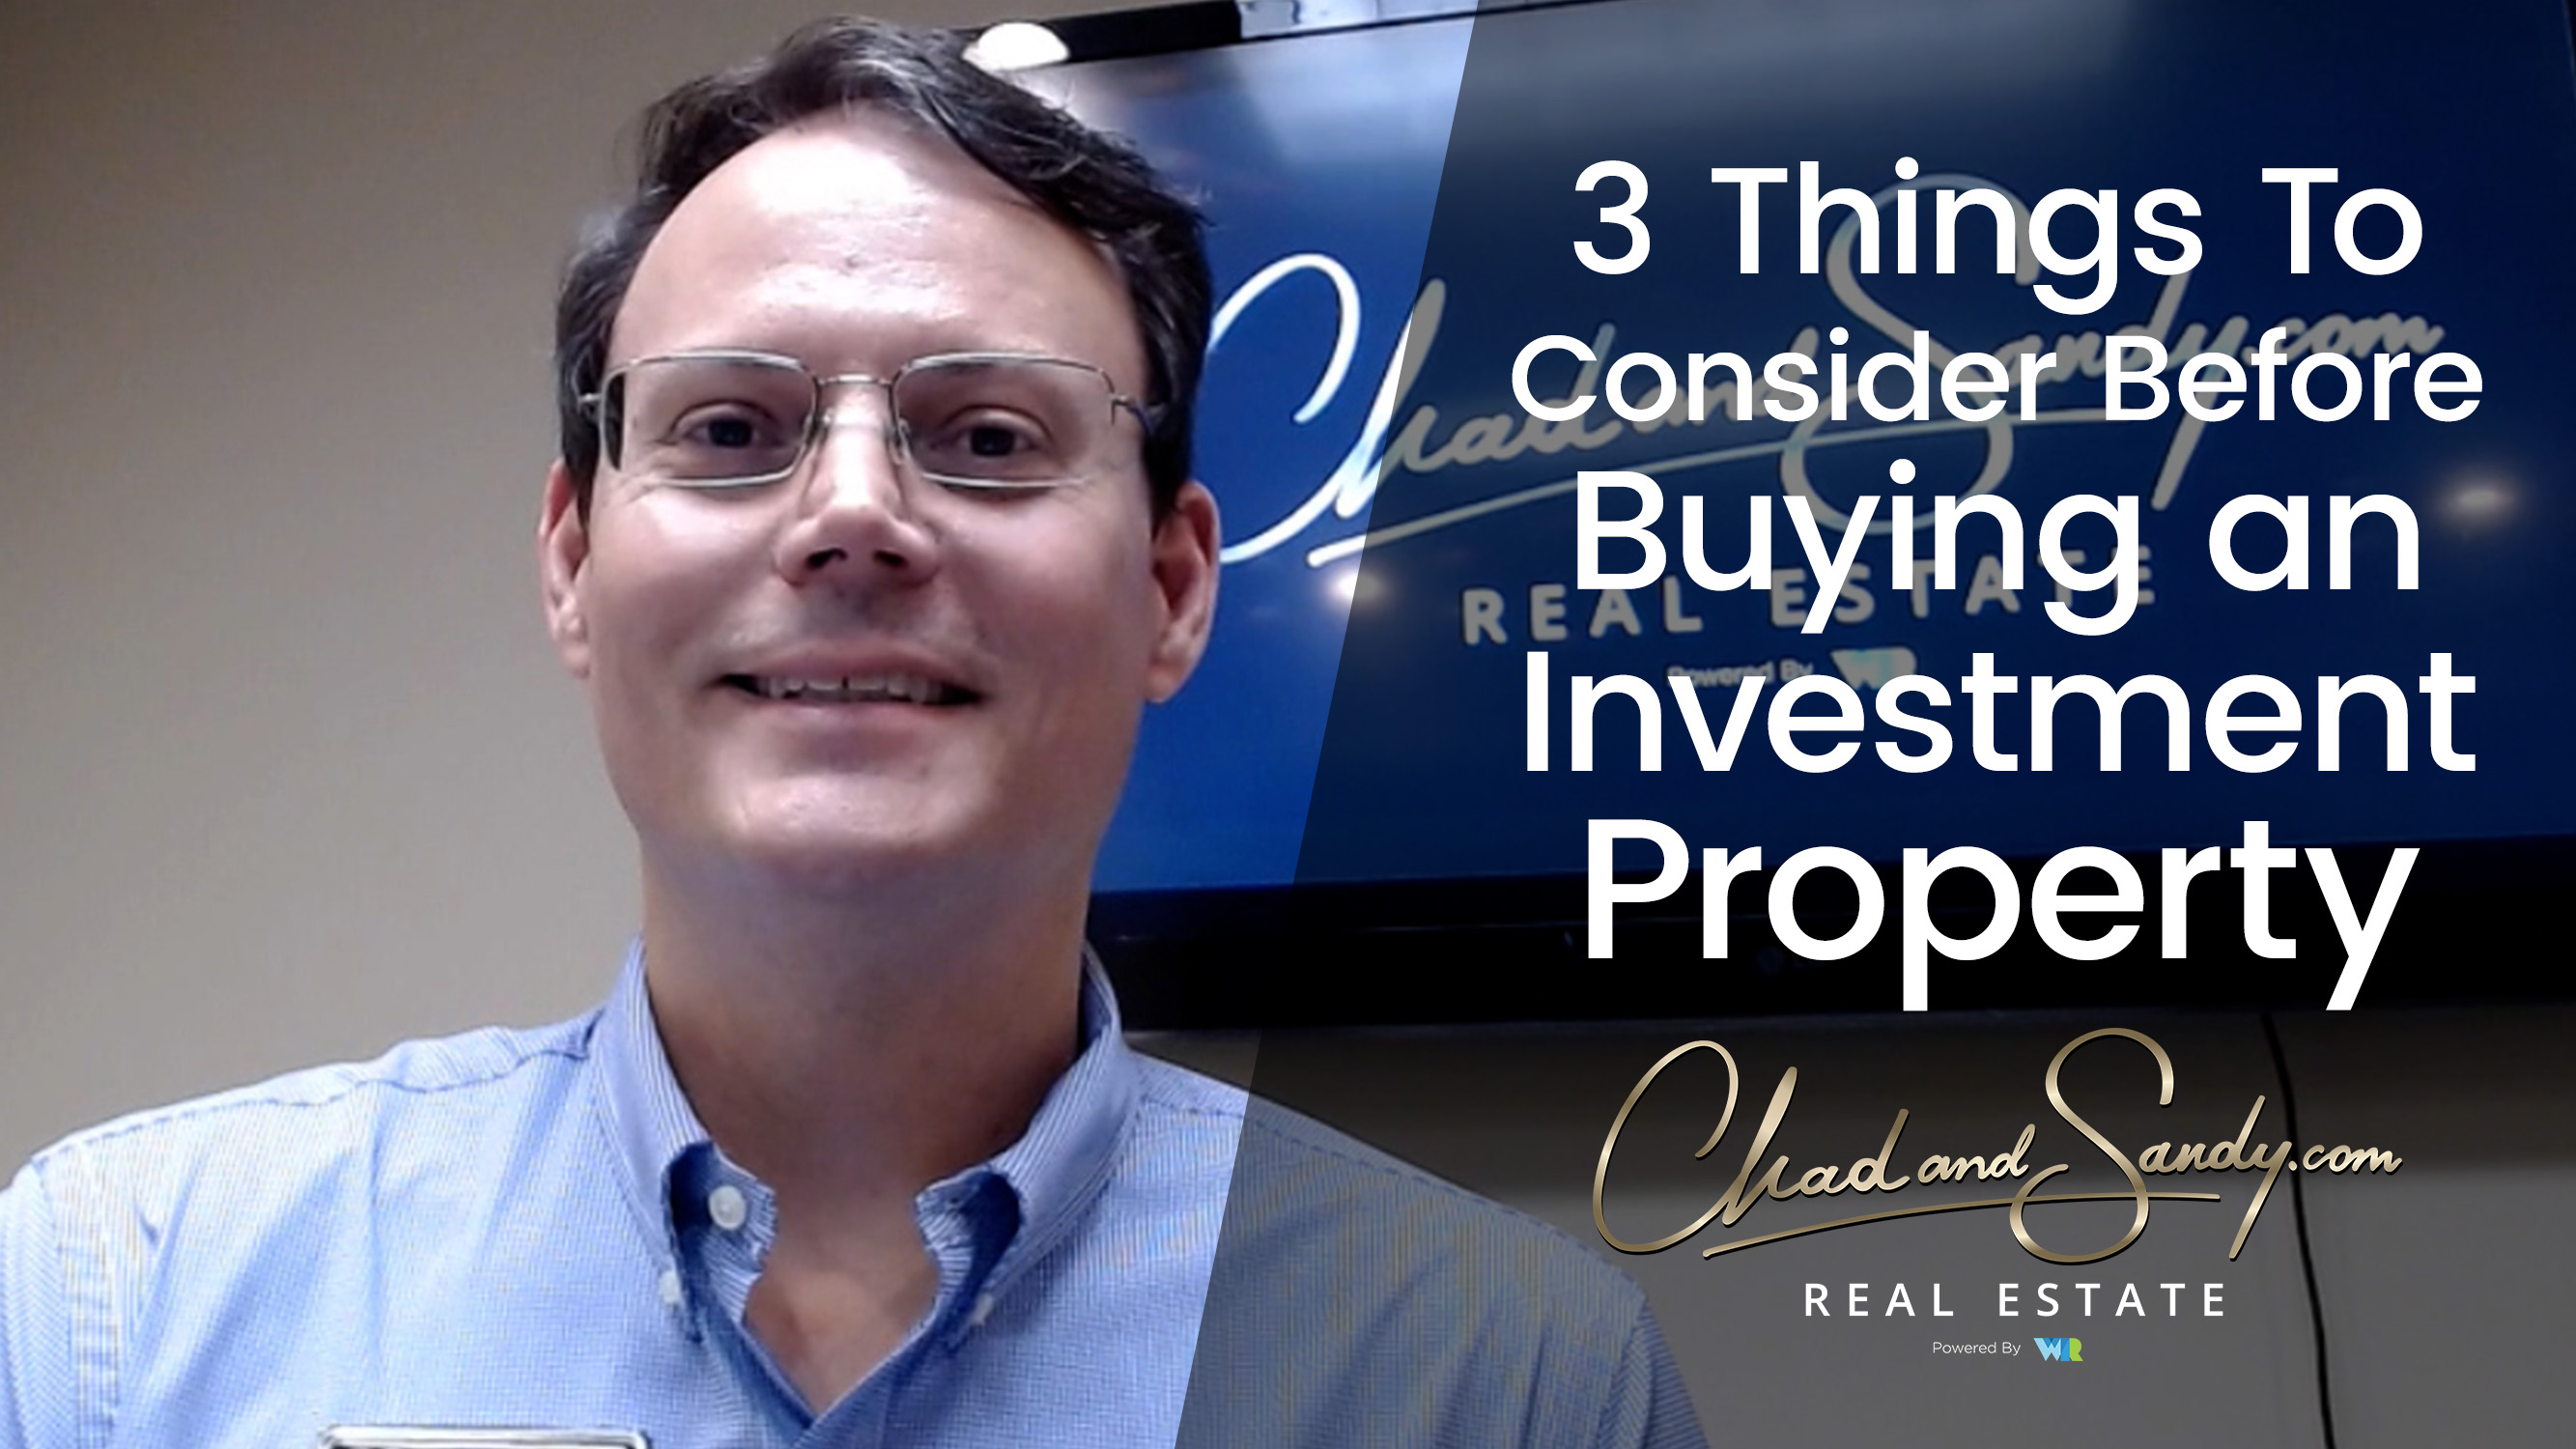 The Top 3 Things to Consider Before Buying an Investment Property